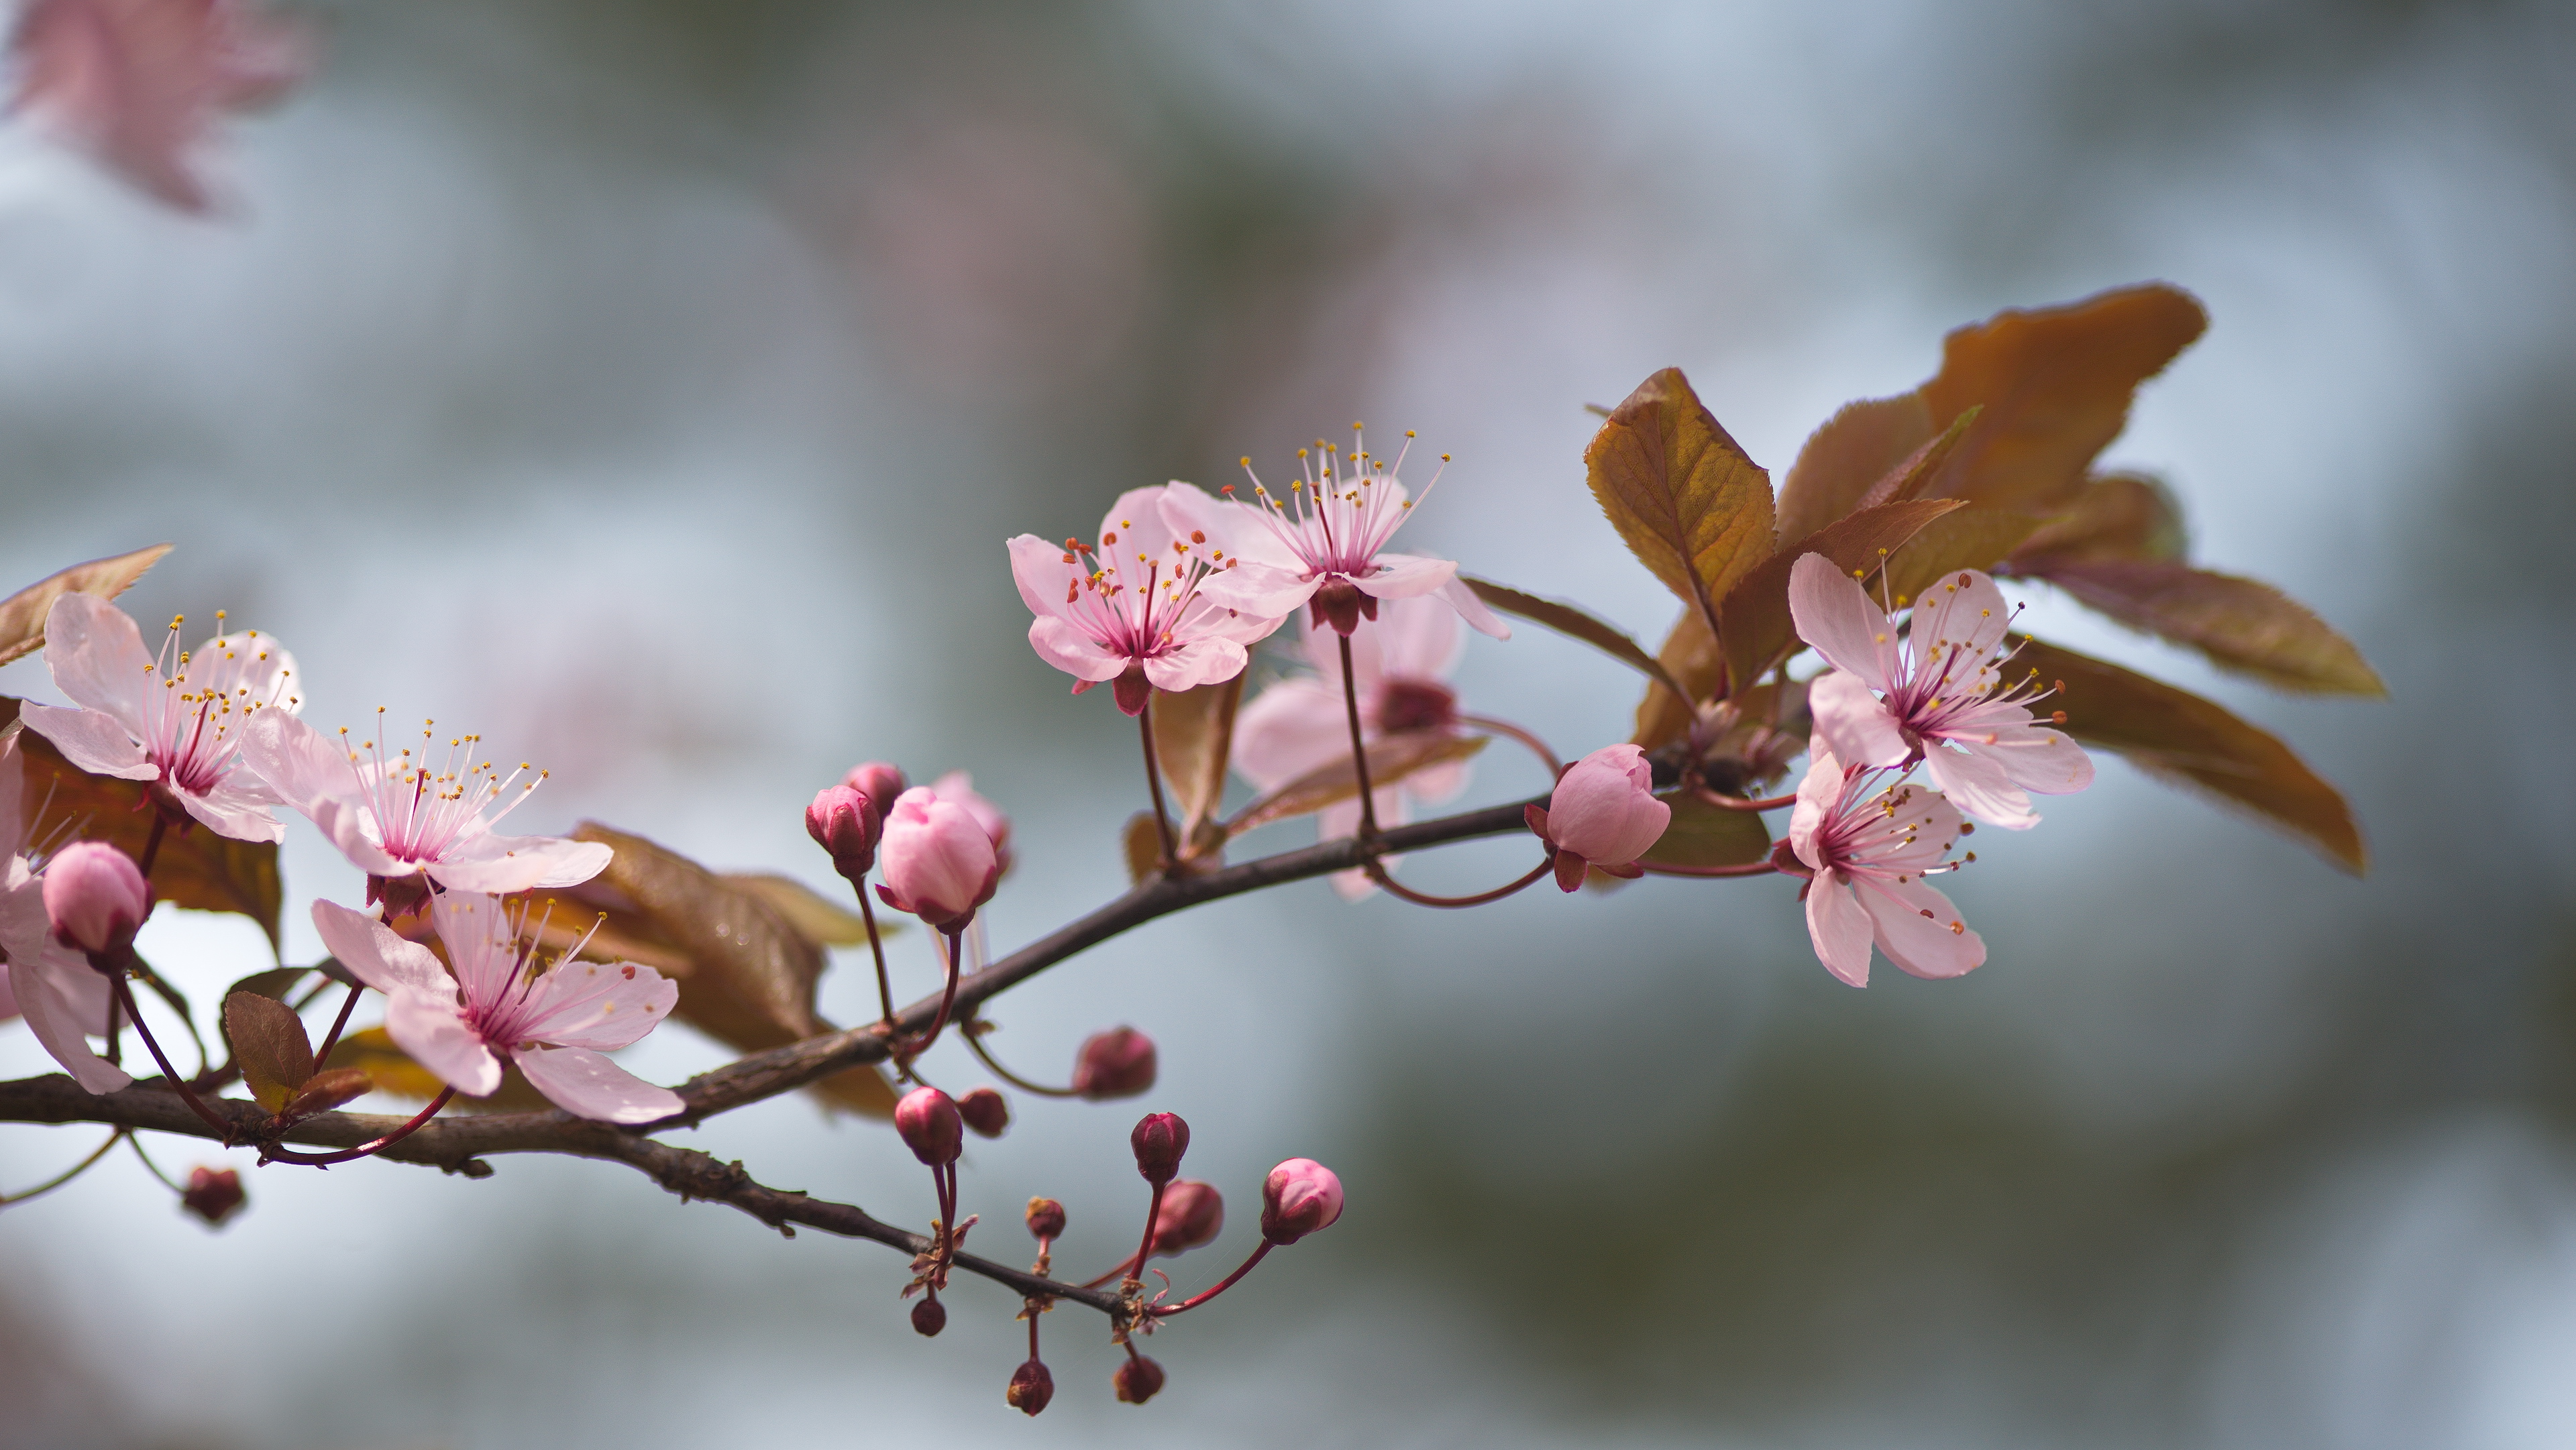 General 3840x2162 floral petals nature trees spring light pink Japan cherry blossom macro